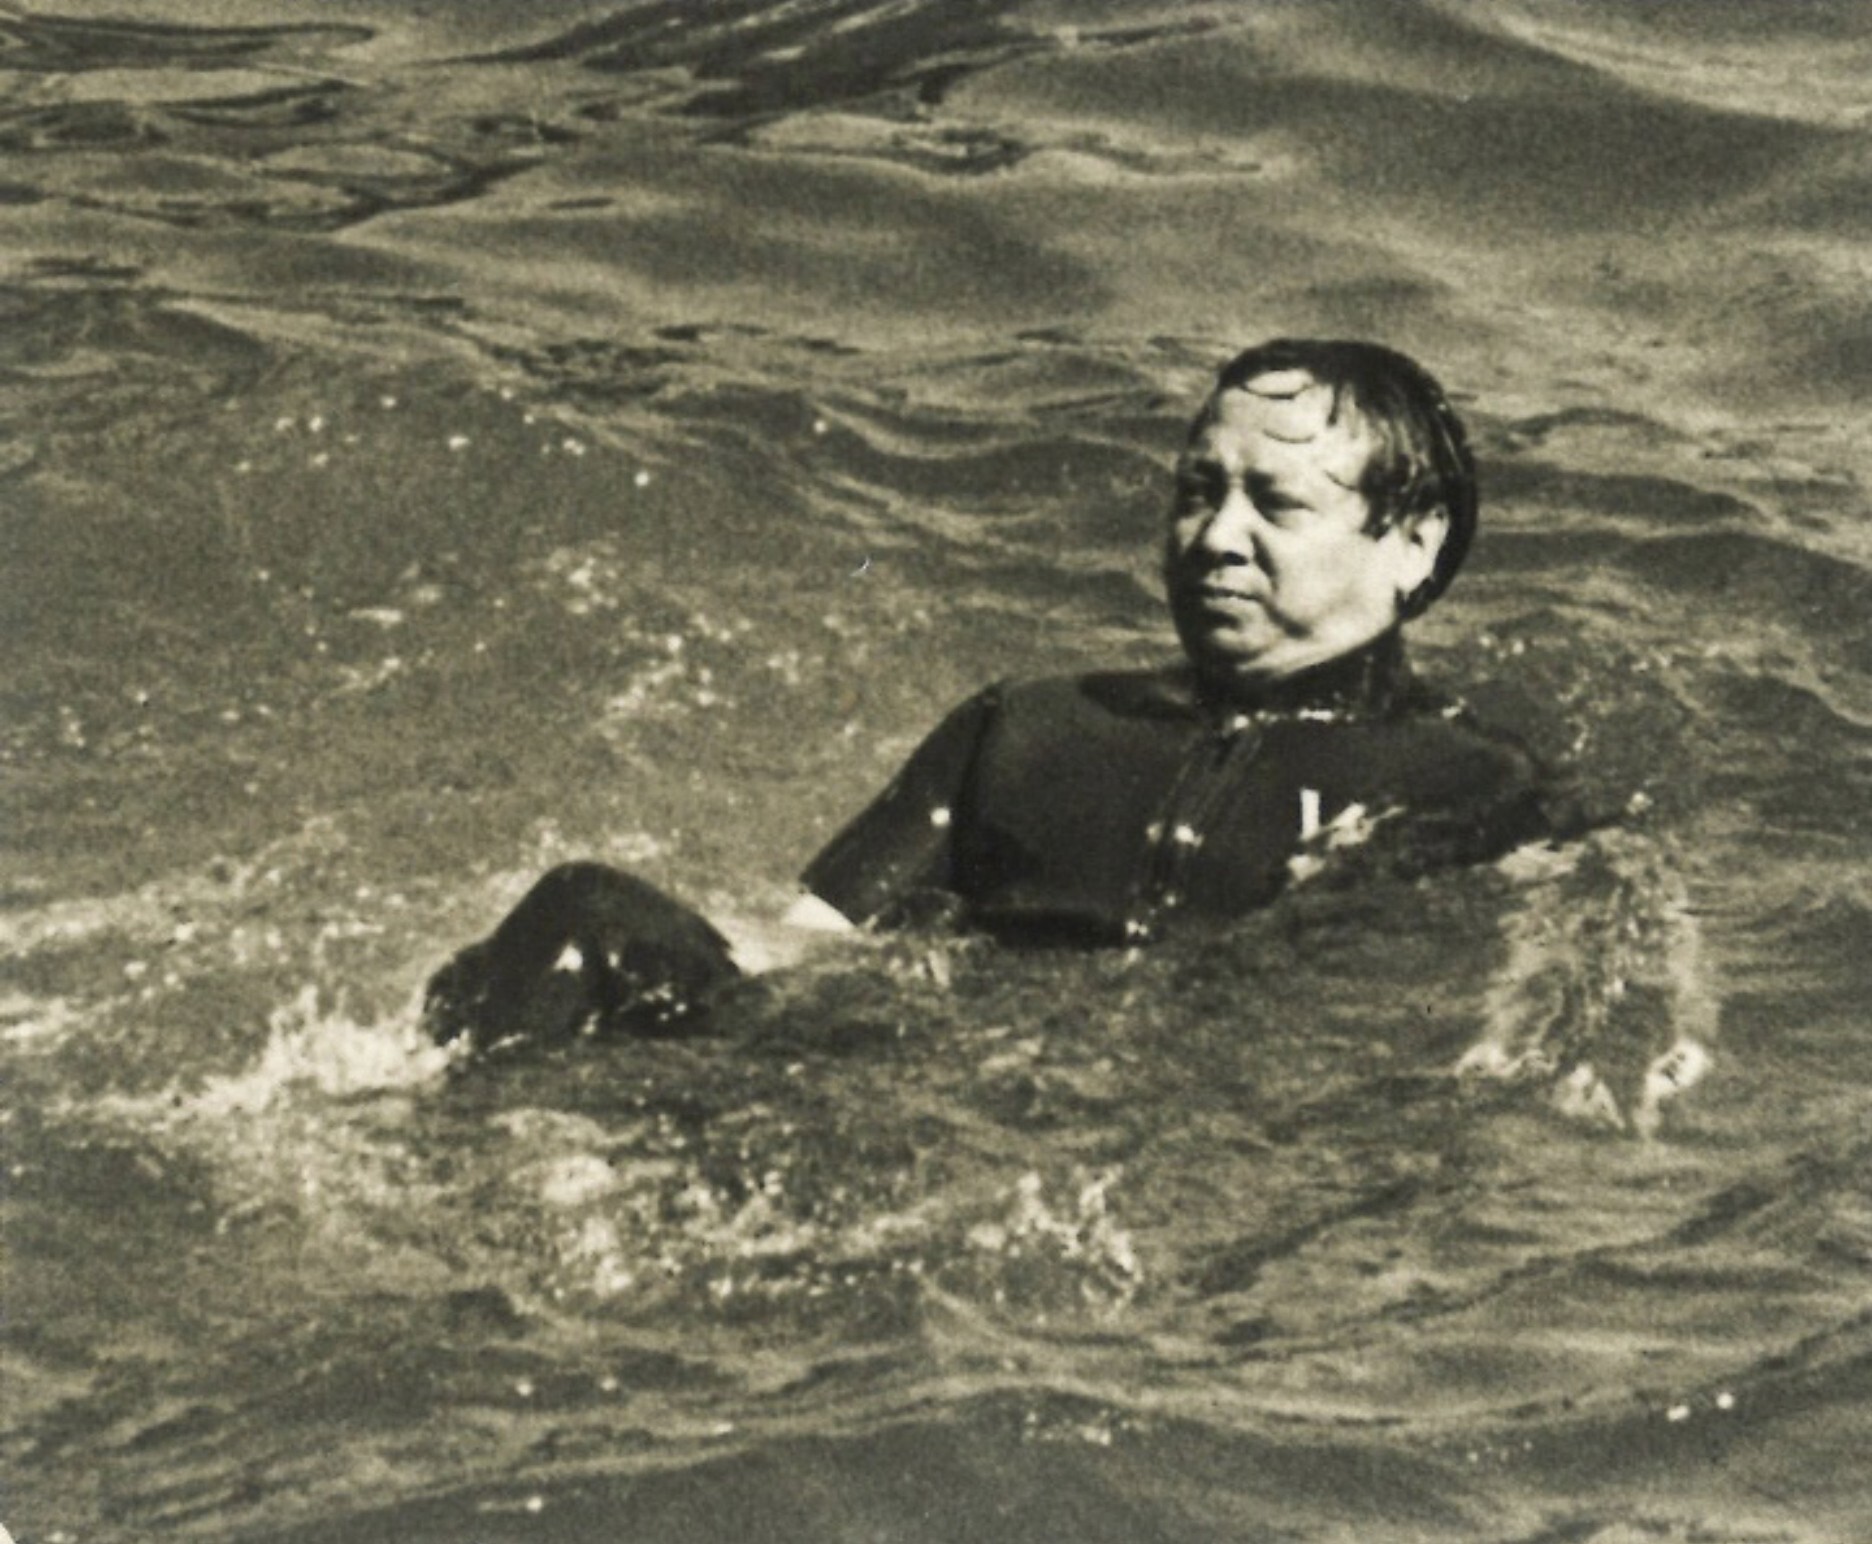 Uncle Ray remembers plunging into frigid waters for charity in 1965. Photo: Handout